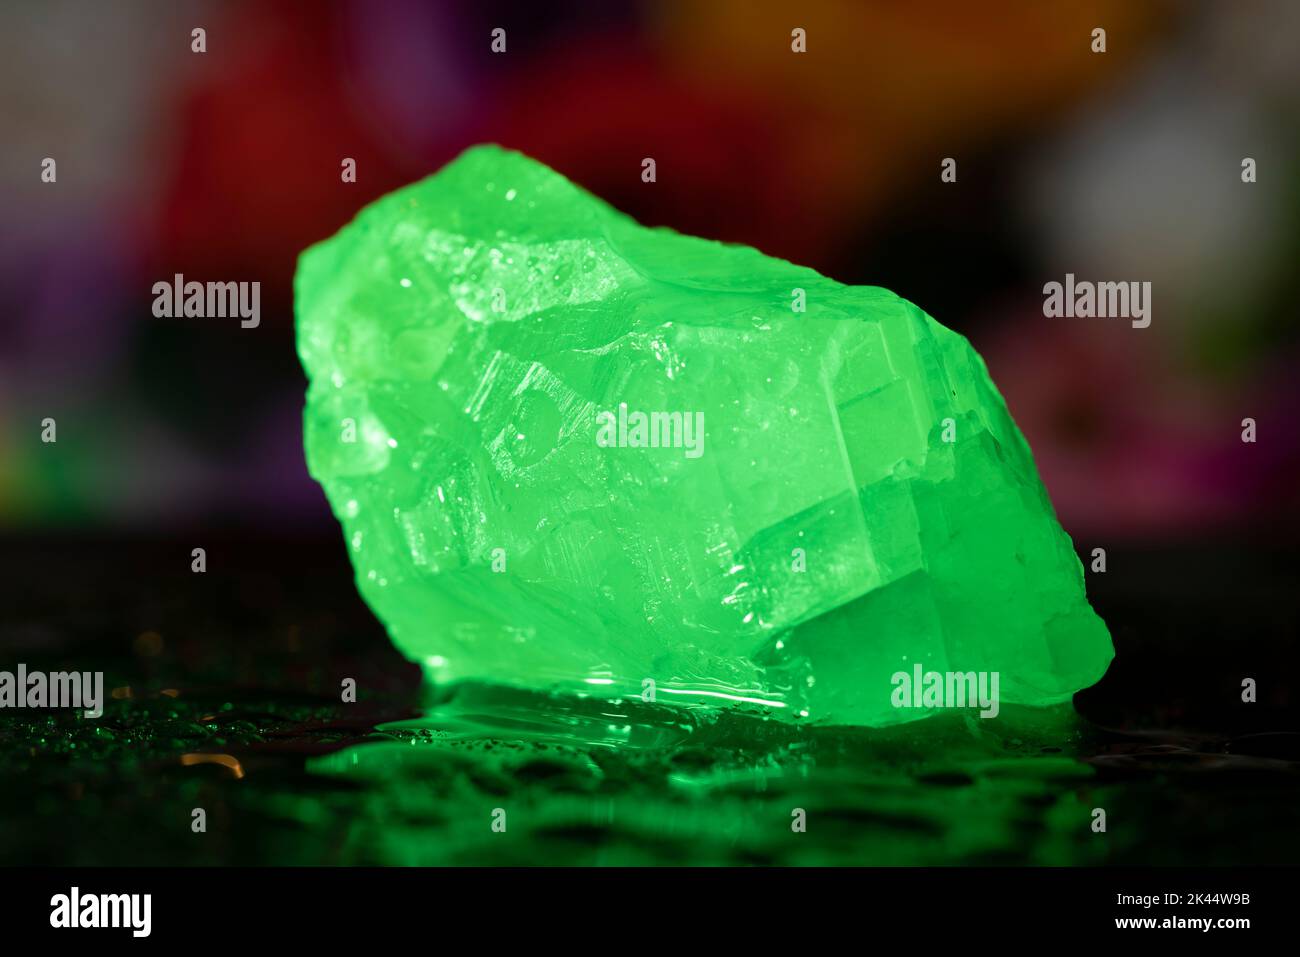 Small white calcite stone on the wet surface in the  green light. Light made stone light green. Macro photo. Stock Photo